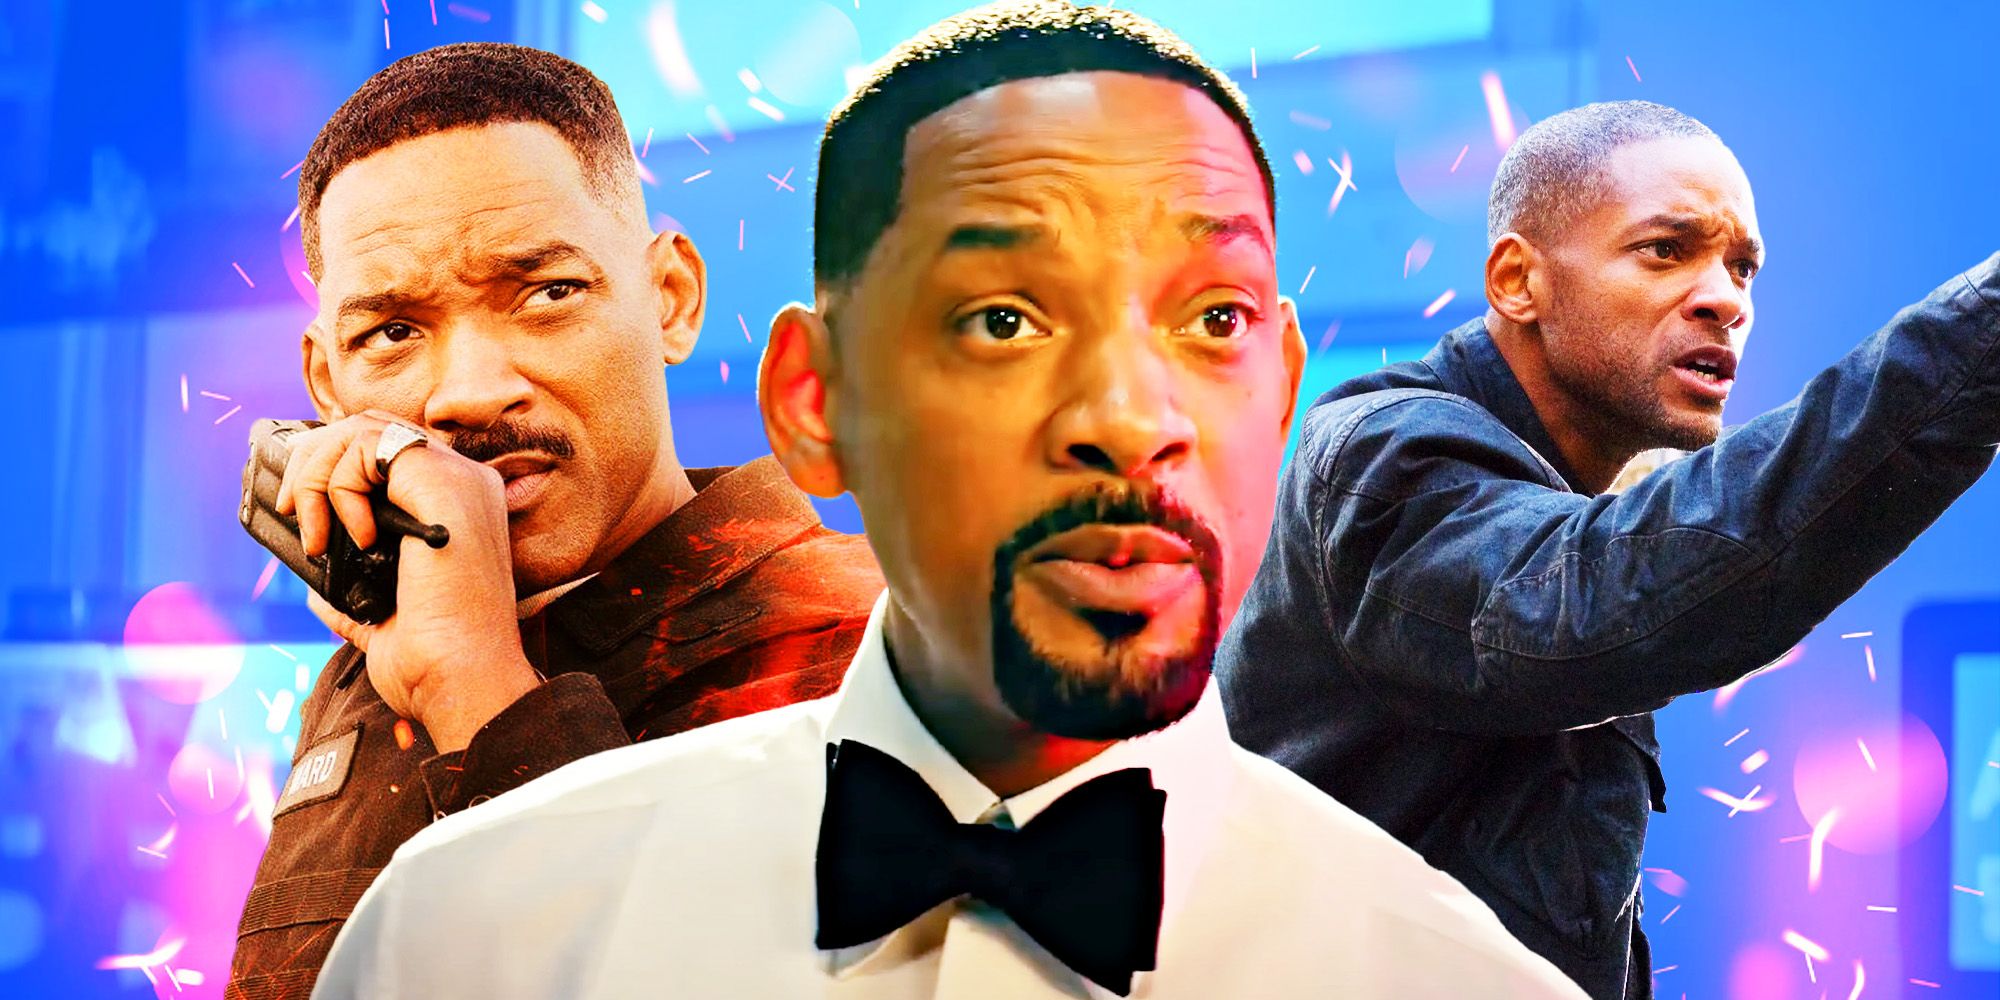 “I Made Bad Choices”: The Bad Boys’ Casting Regret That Led To Will Smith